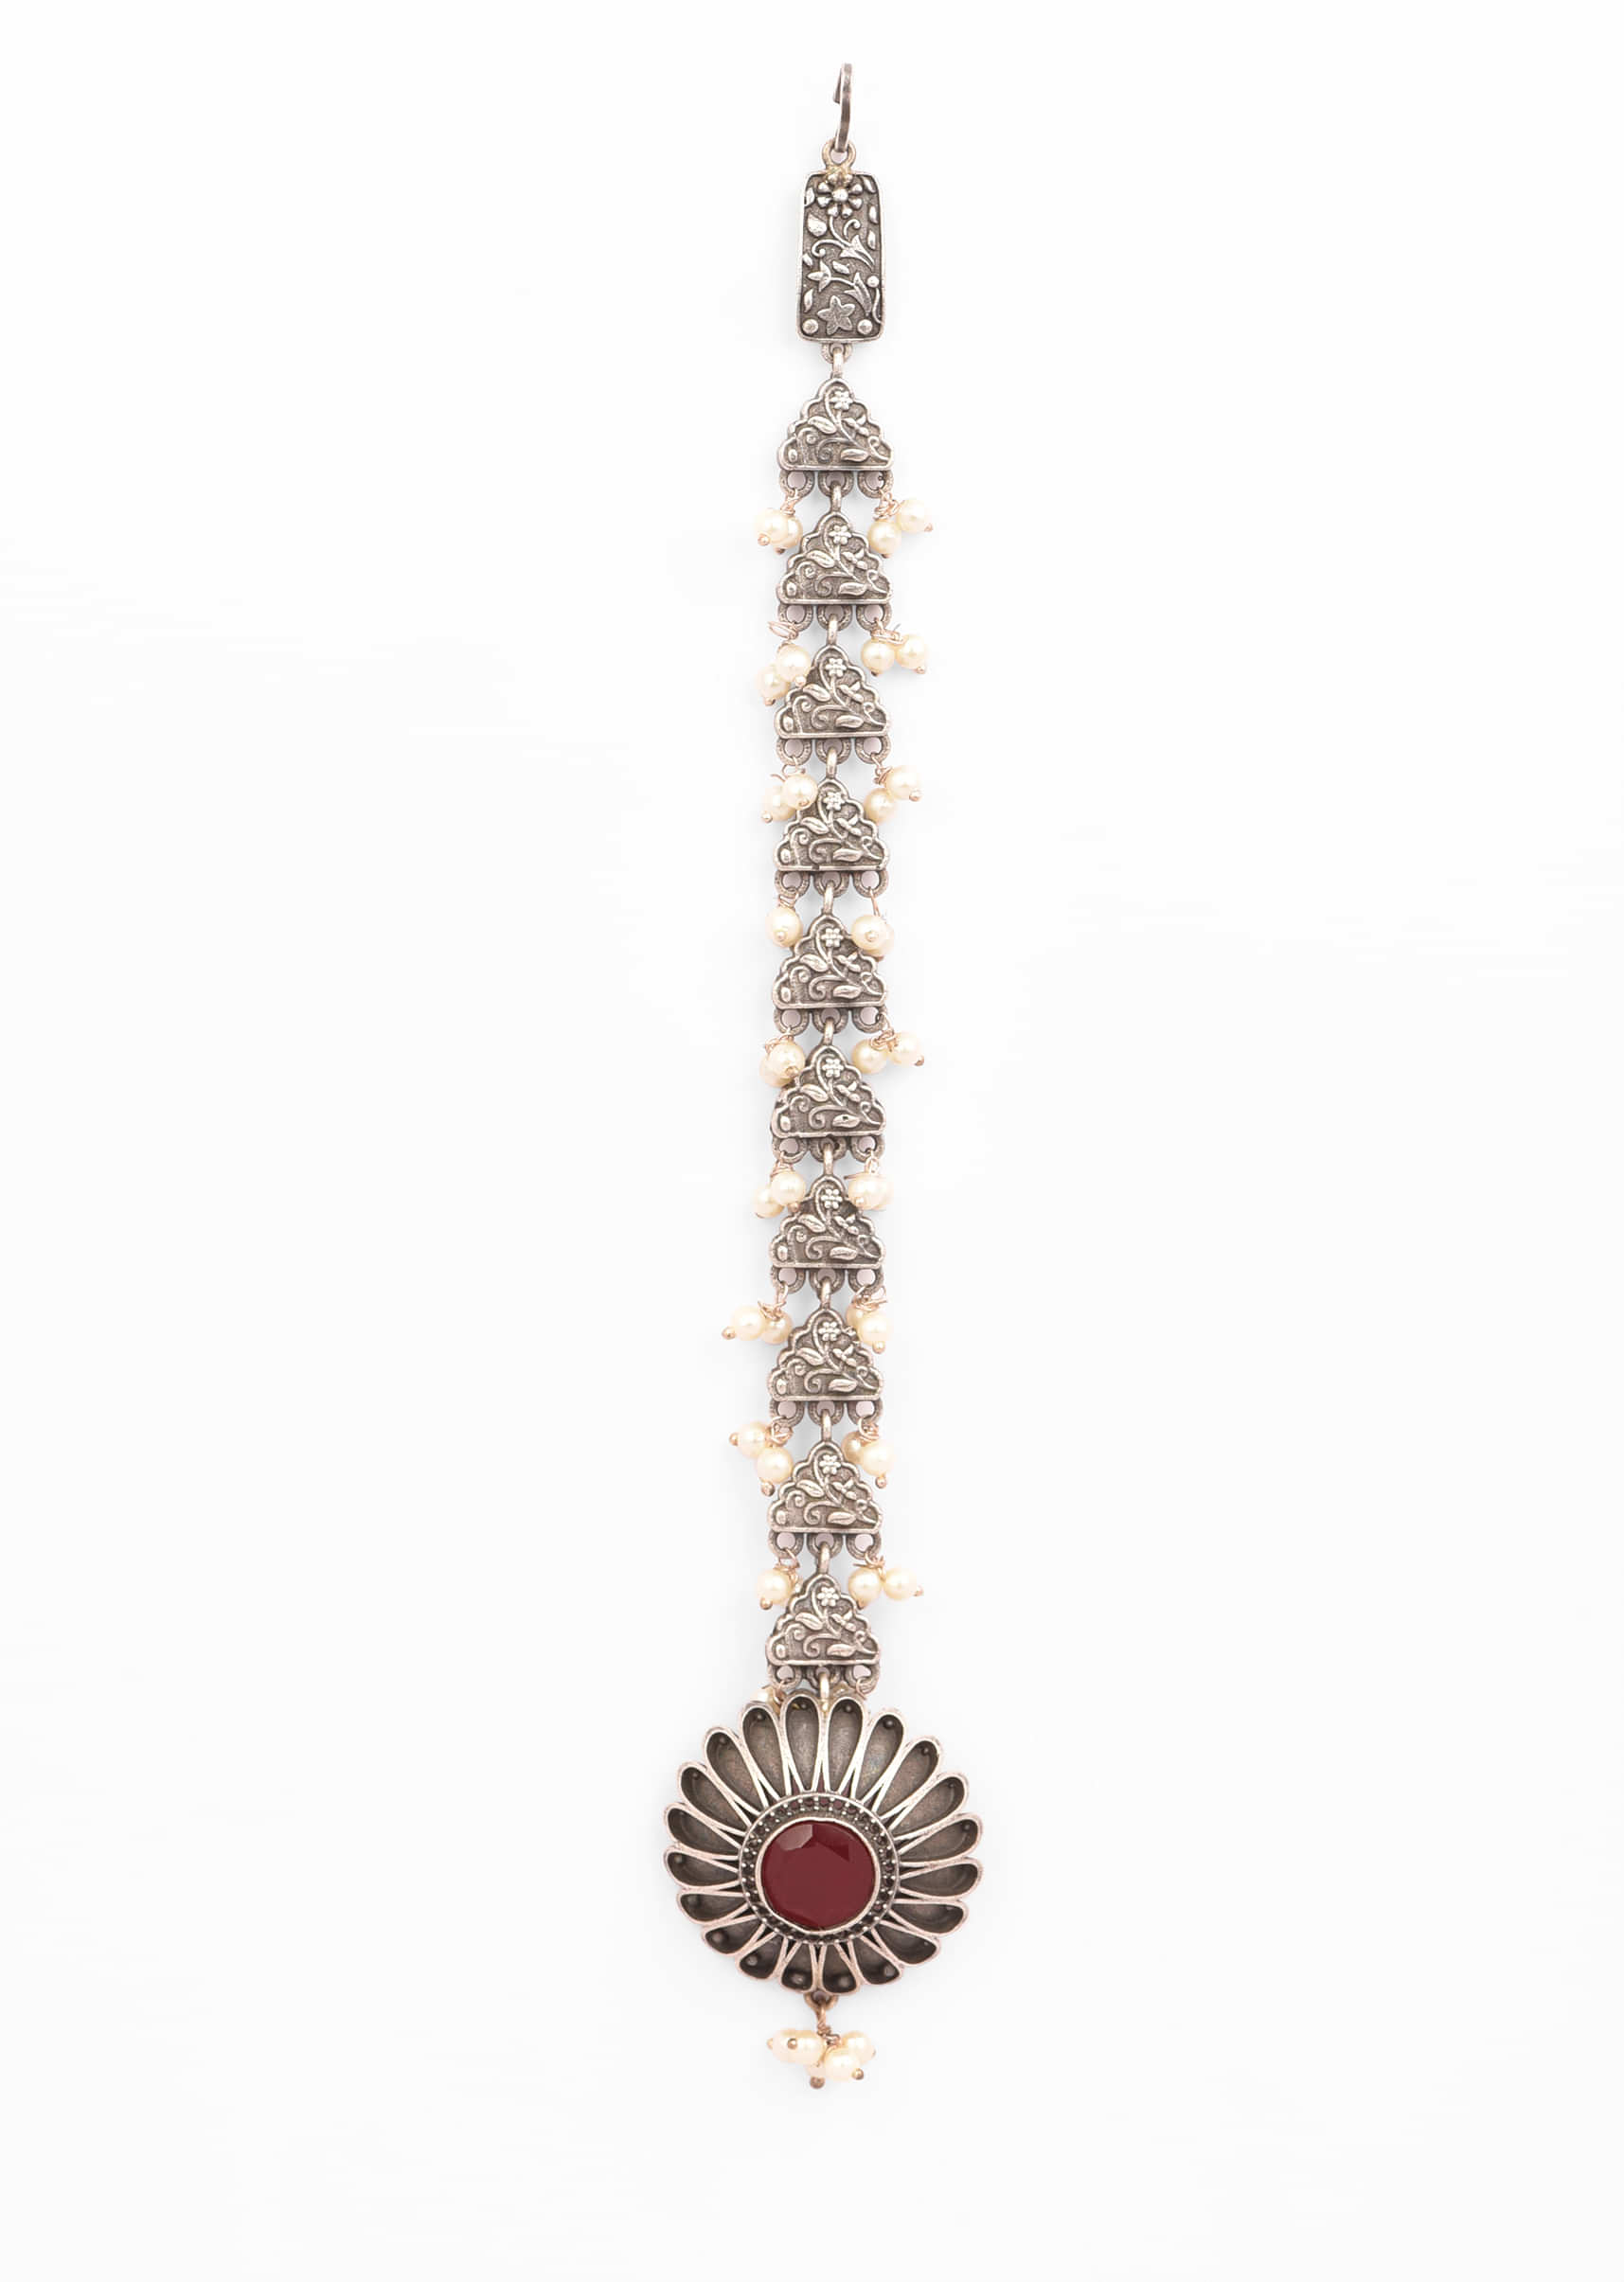 Oxidised Silver Mangtika With Carved Flower Studded In Red Stones And Pearl Tassels 